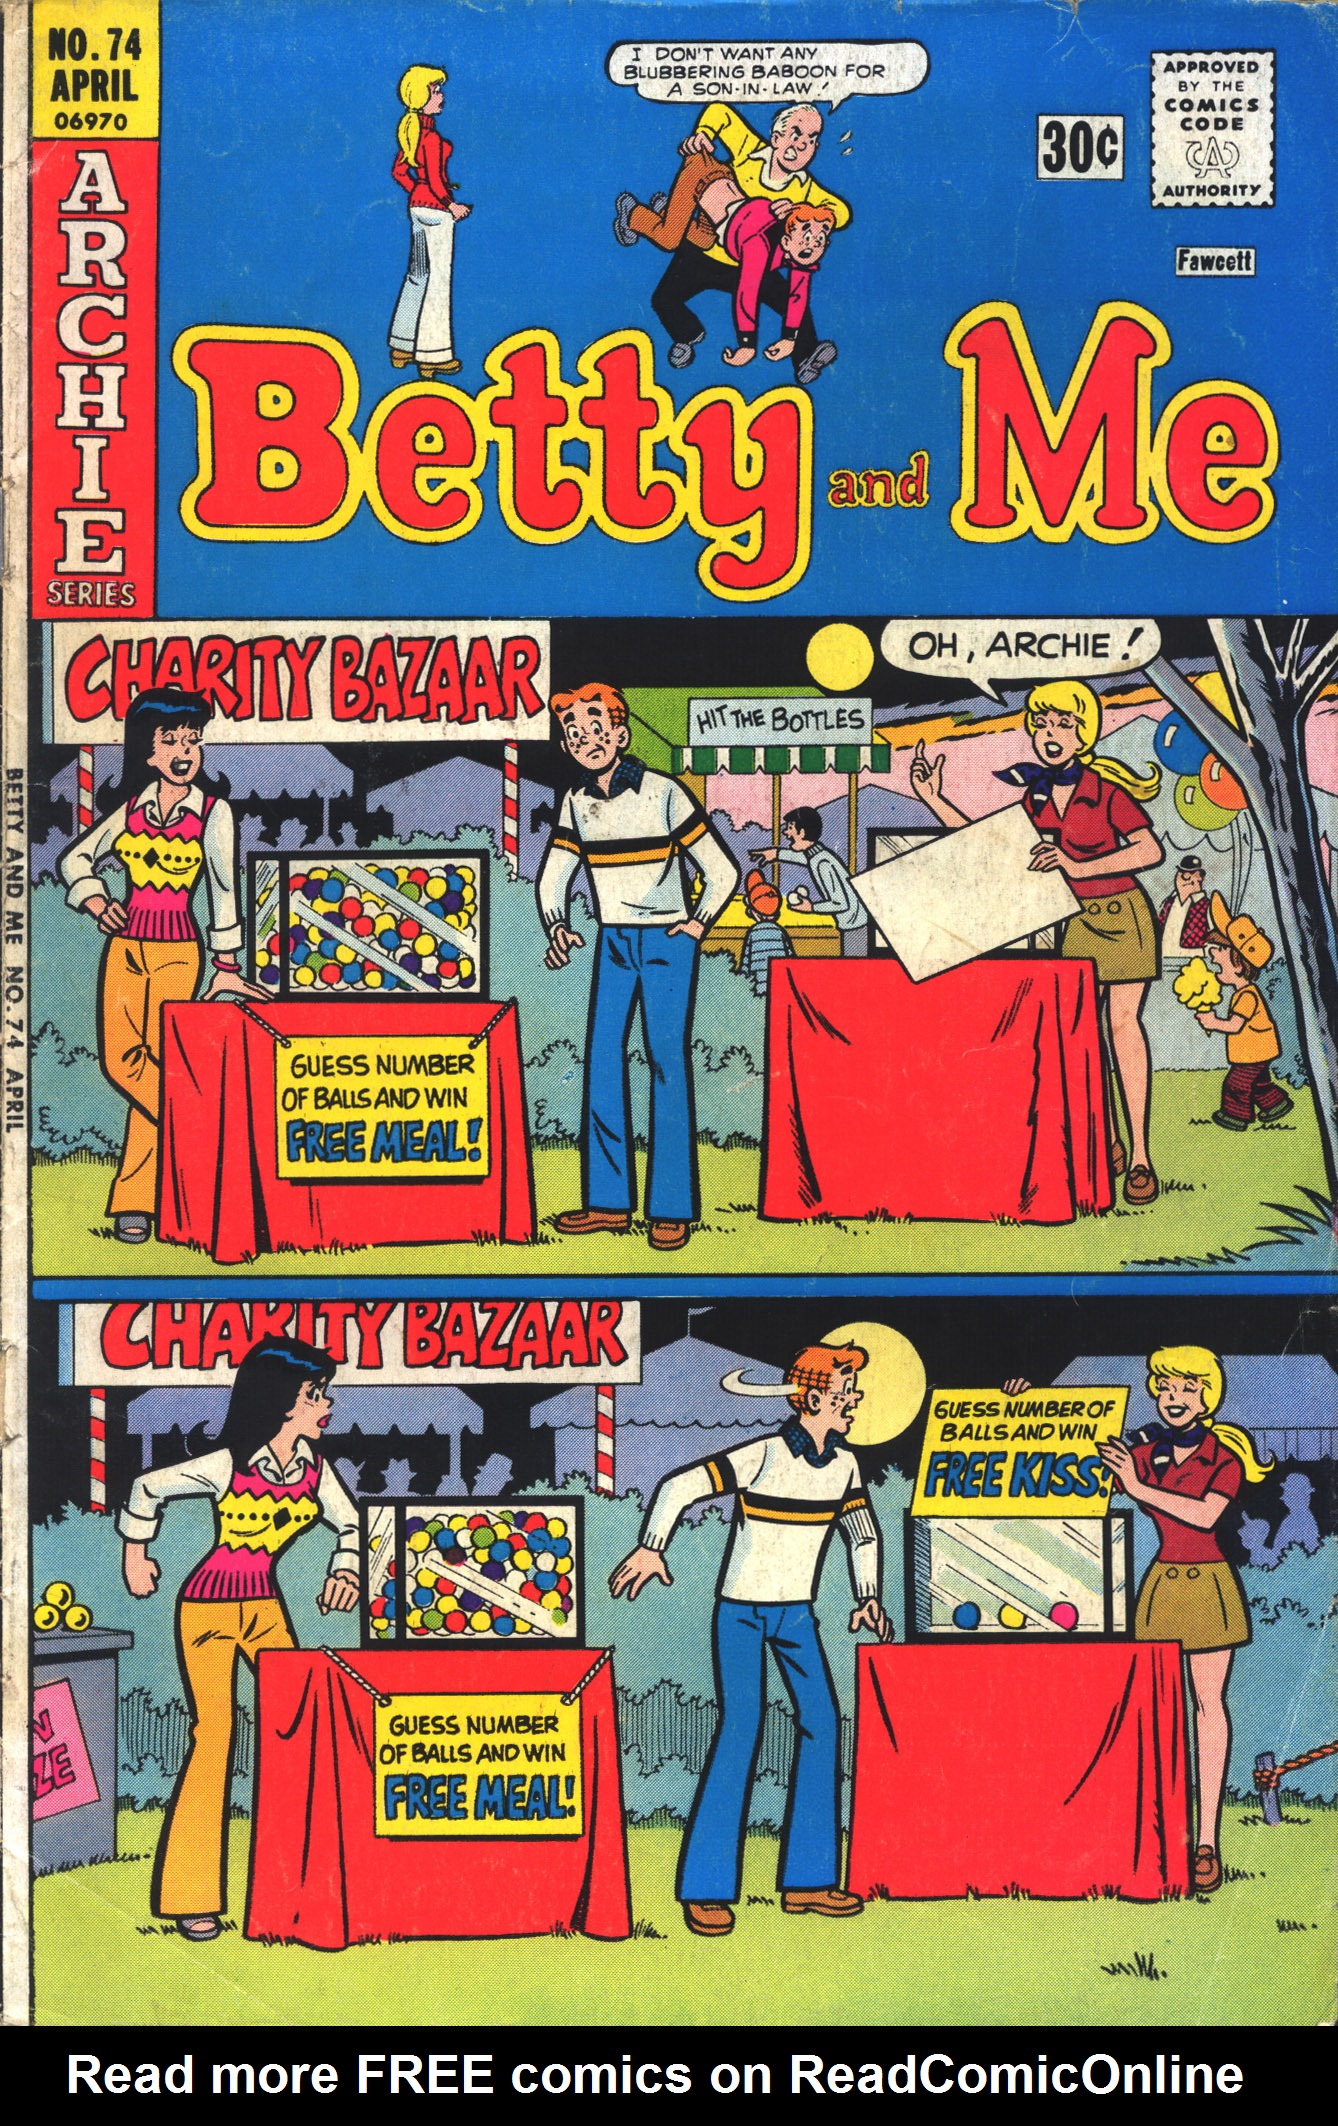 Read online Betty and Me comic -  Issue #74 - 1